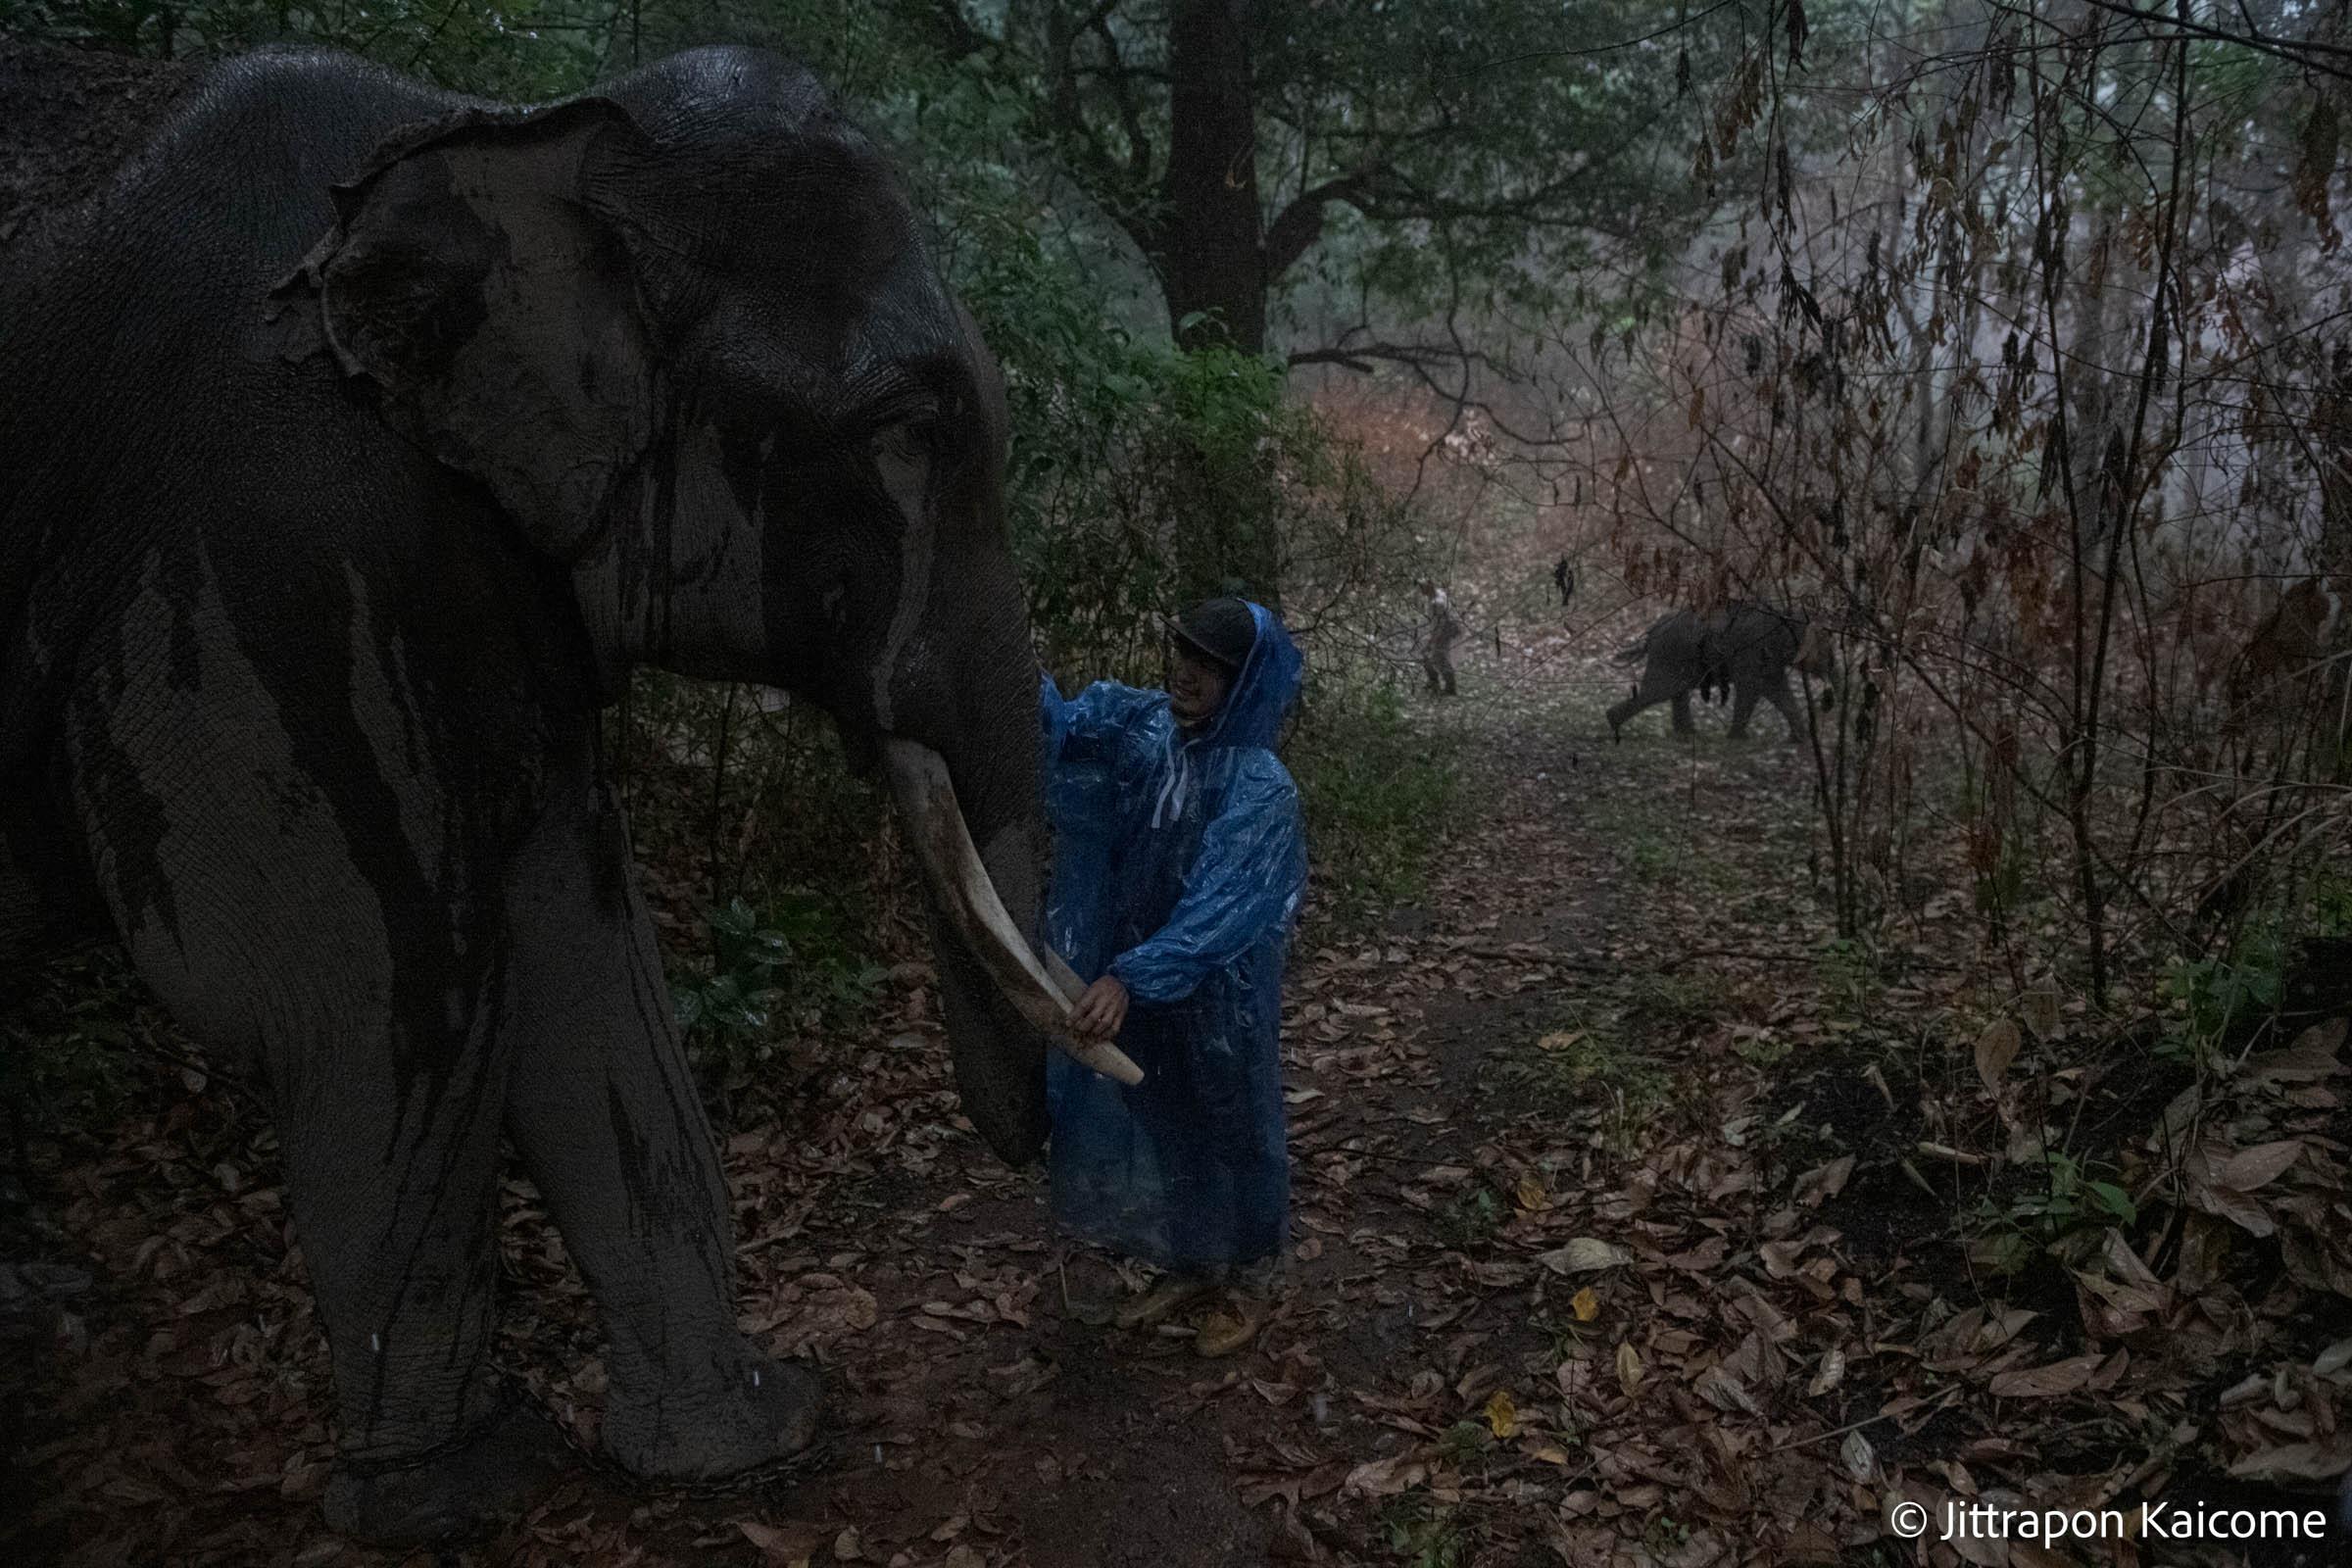 An Inseparable Bond - In the pouring rain, a mahout comforts his elephants...